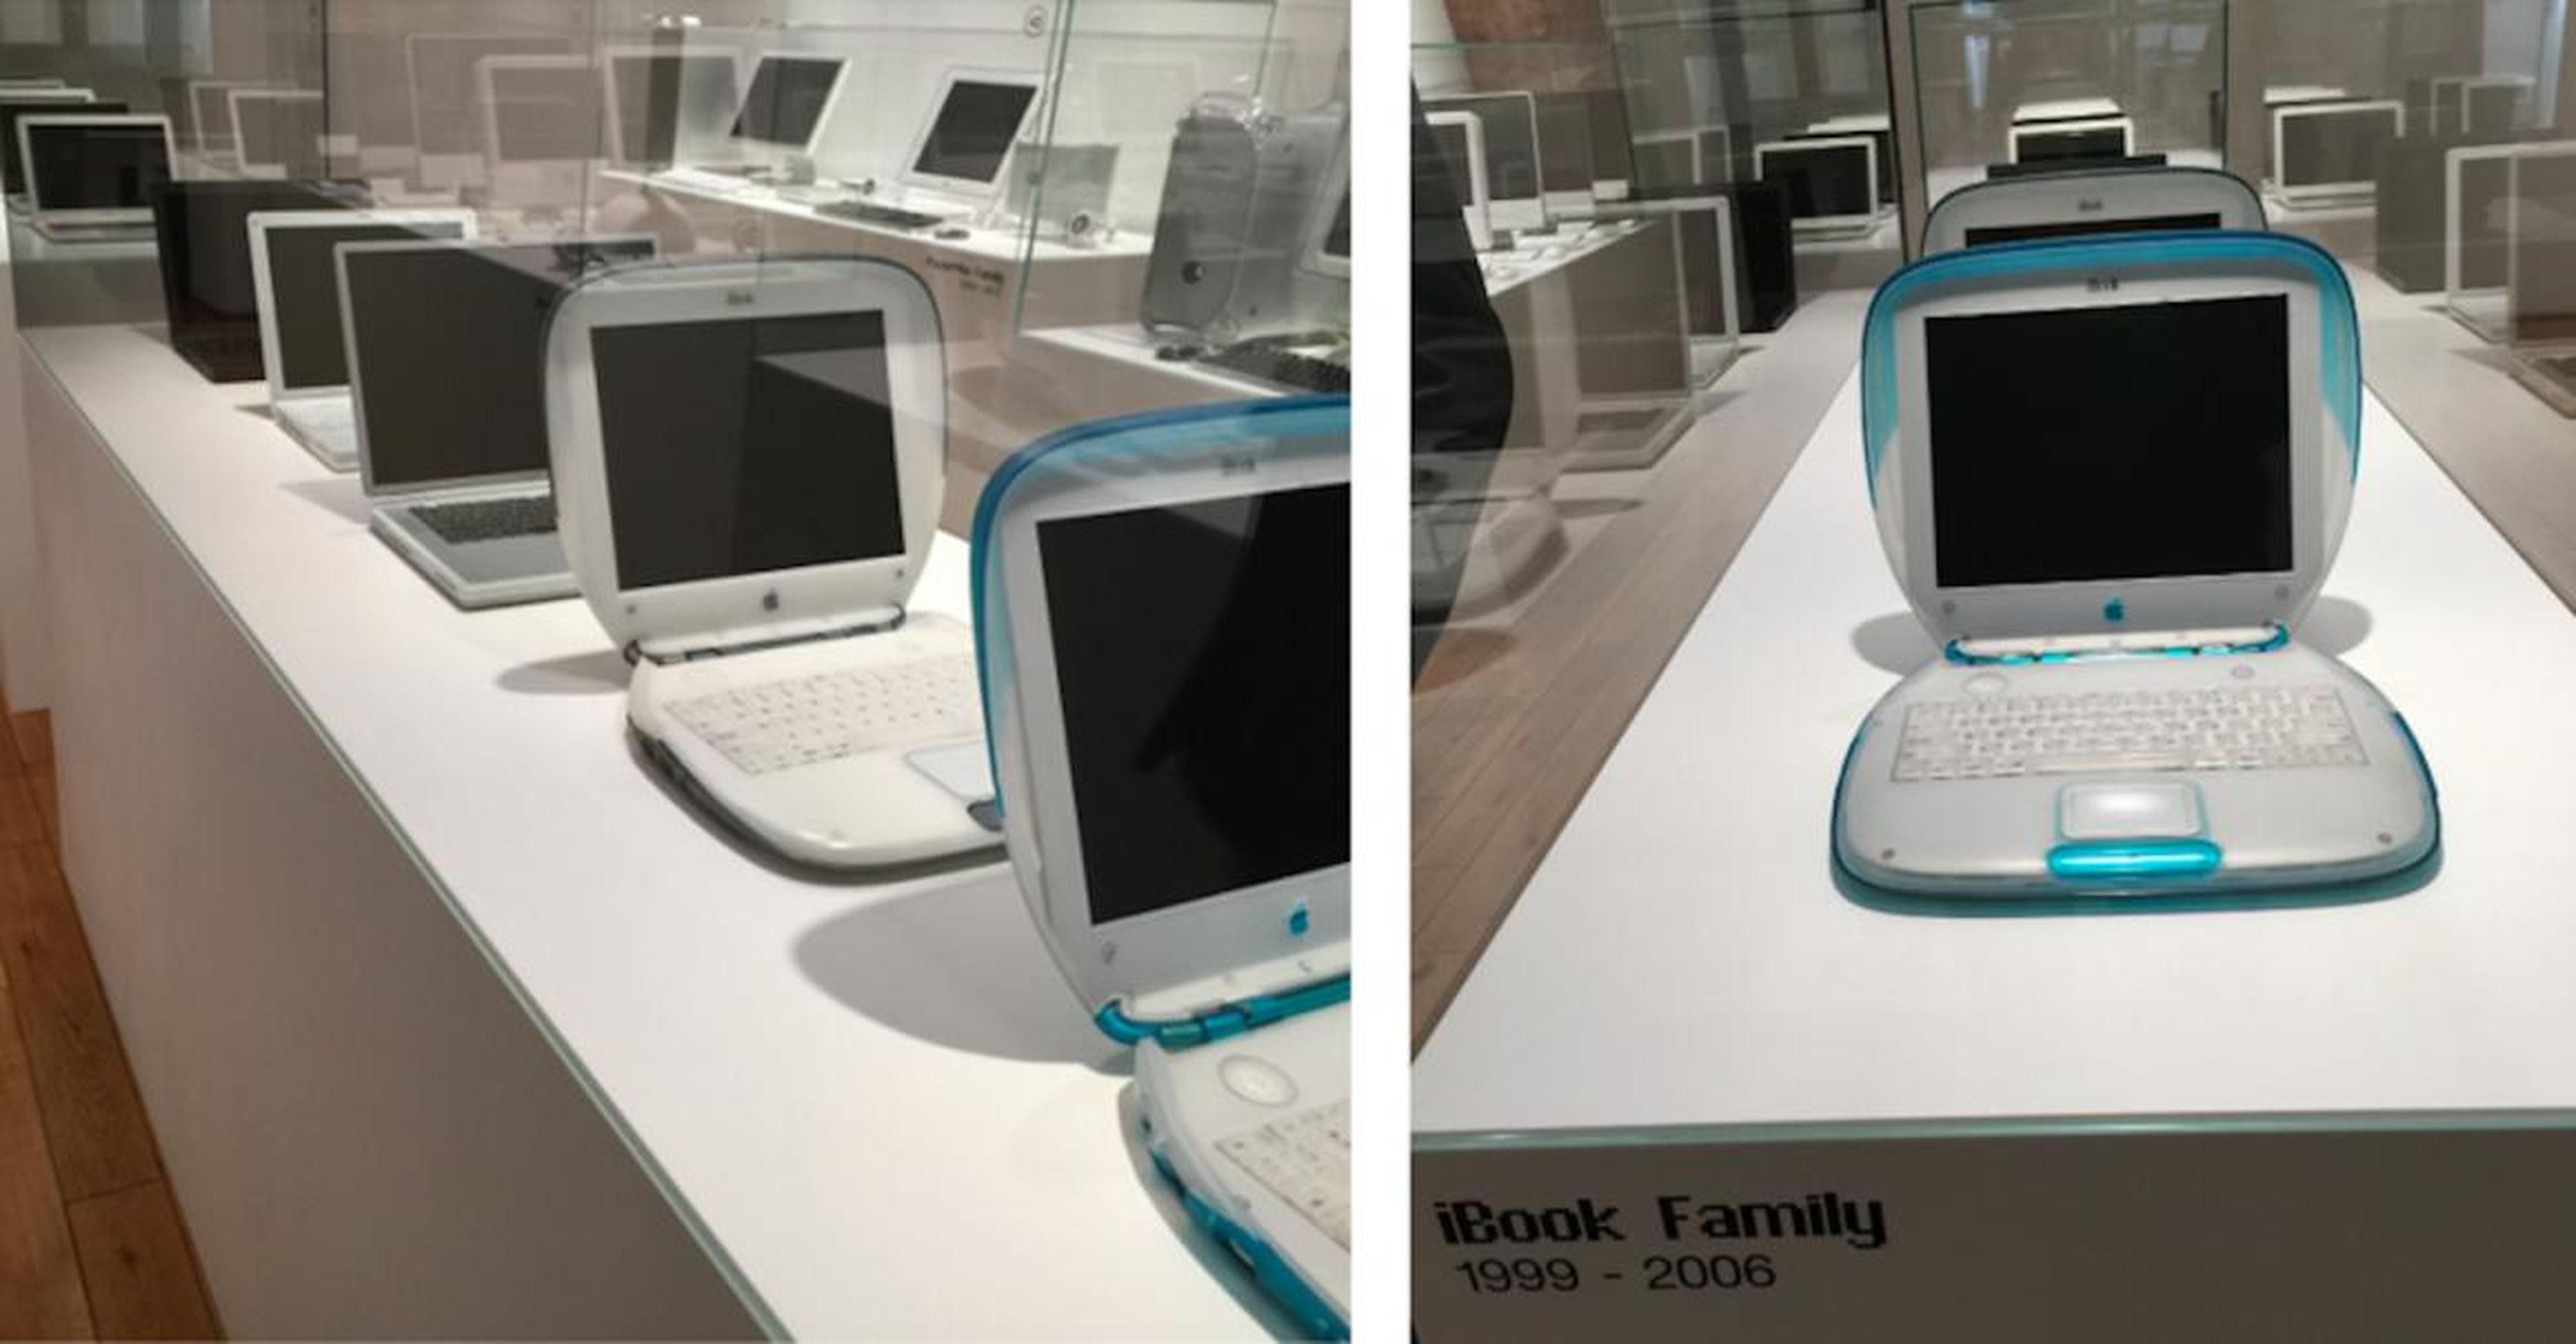 Starting in 1999, the iMac design would also give way to the similarly colorful iBook family of laptops, which looked funky, but would later be replaced by the more rectangular MacBook.